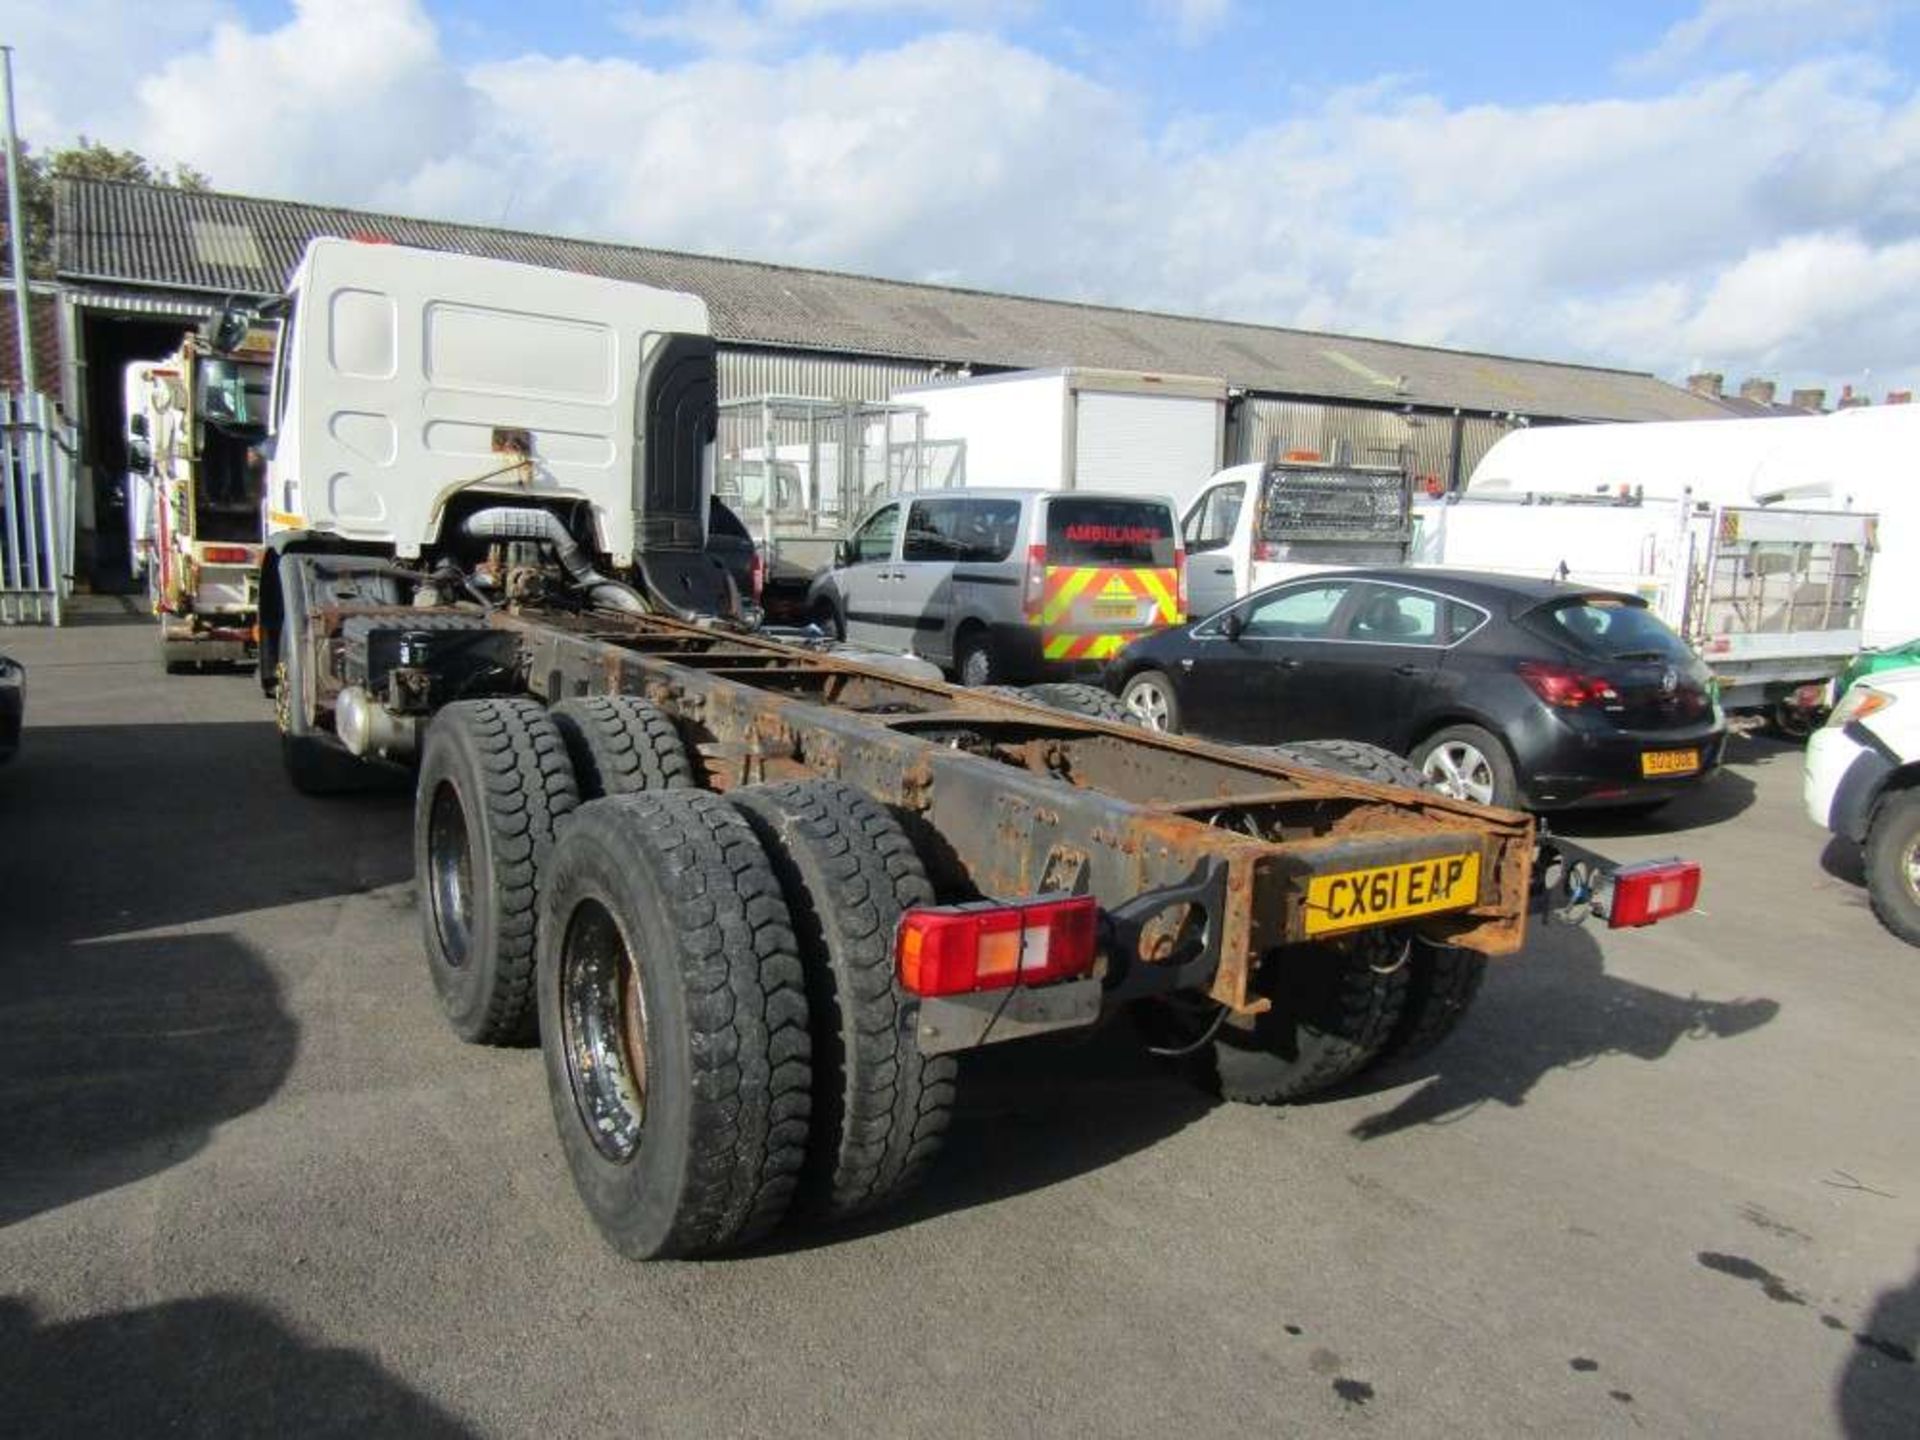 2011 61 reg Volvo 340 6 x 4 Chassis Cab (Non Runner) - Image 3 of 7